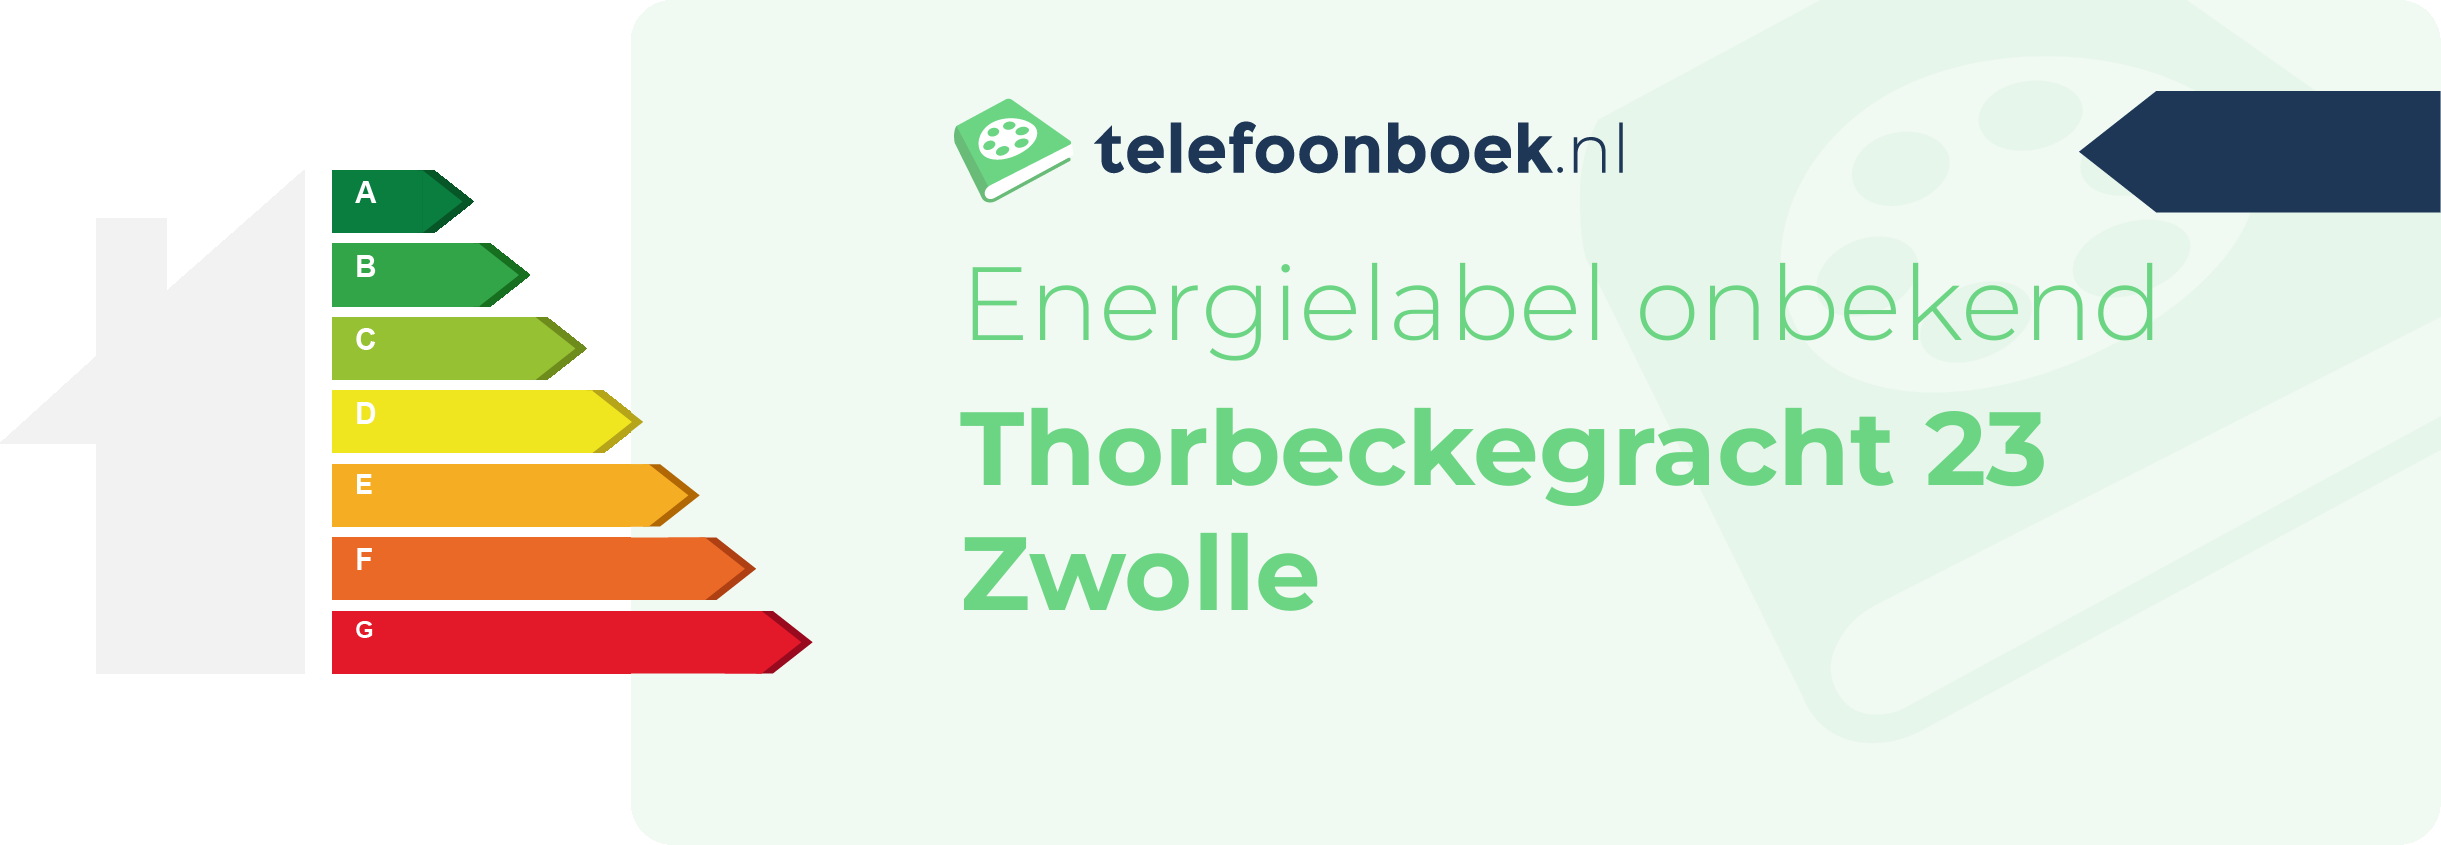 Energielabel Thorbeckegracht 23 Zwolle